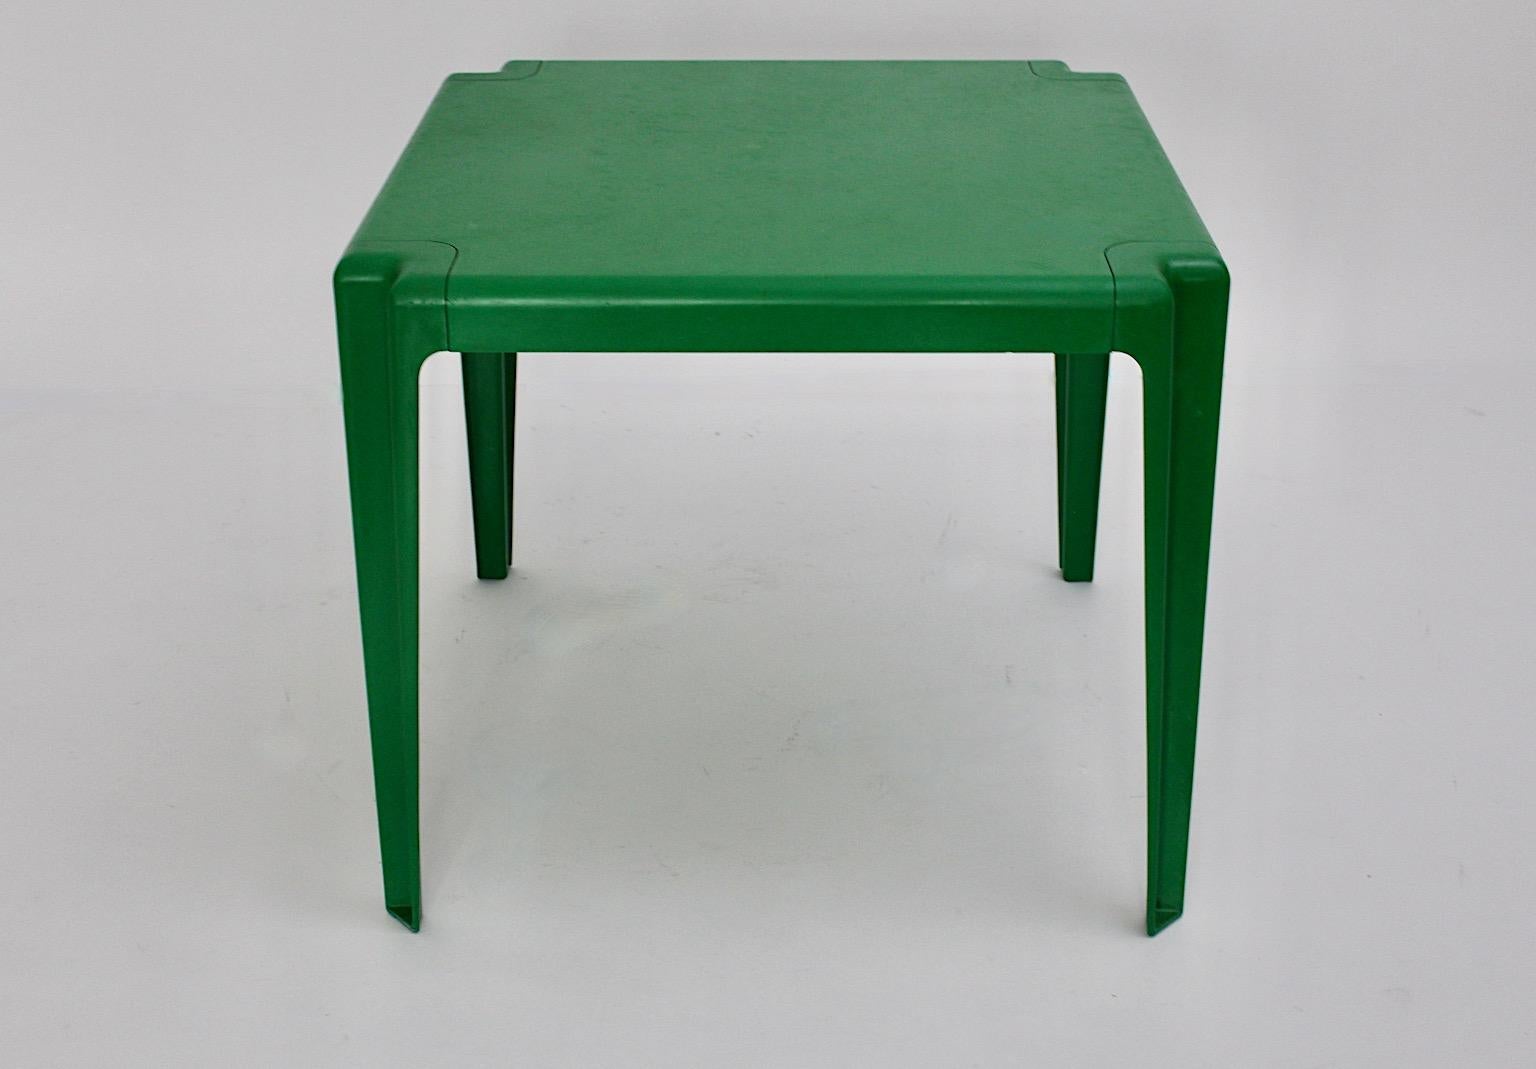 Fiberglass Space Age Vintage Green Plastic Dining Table Patio Table Helmut Bätzner, 1960s For Sale